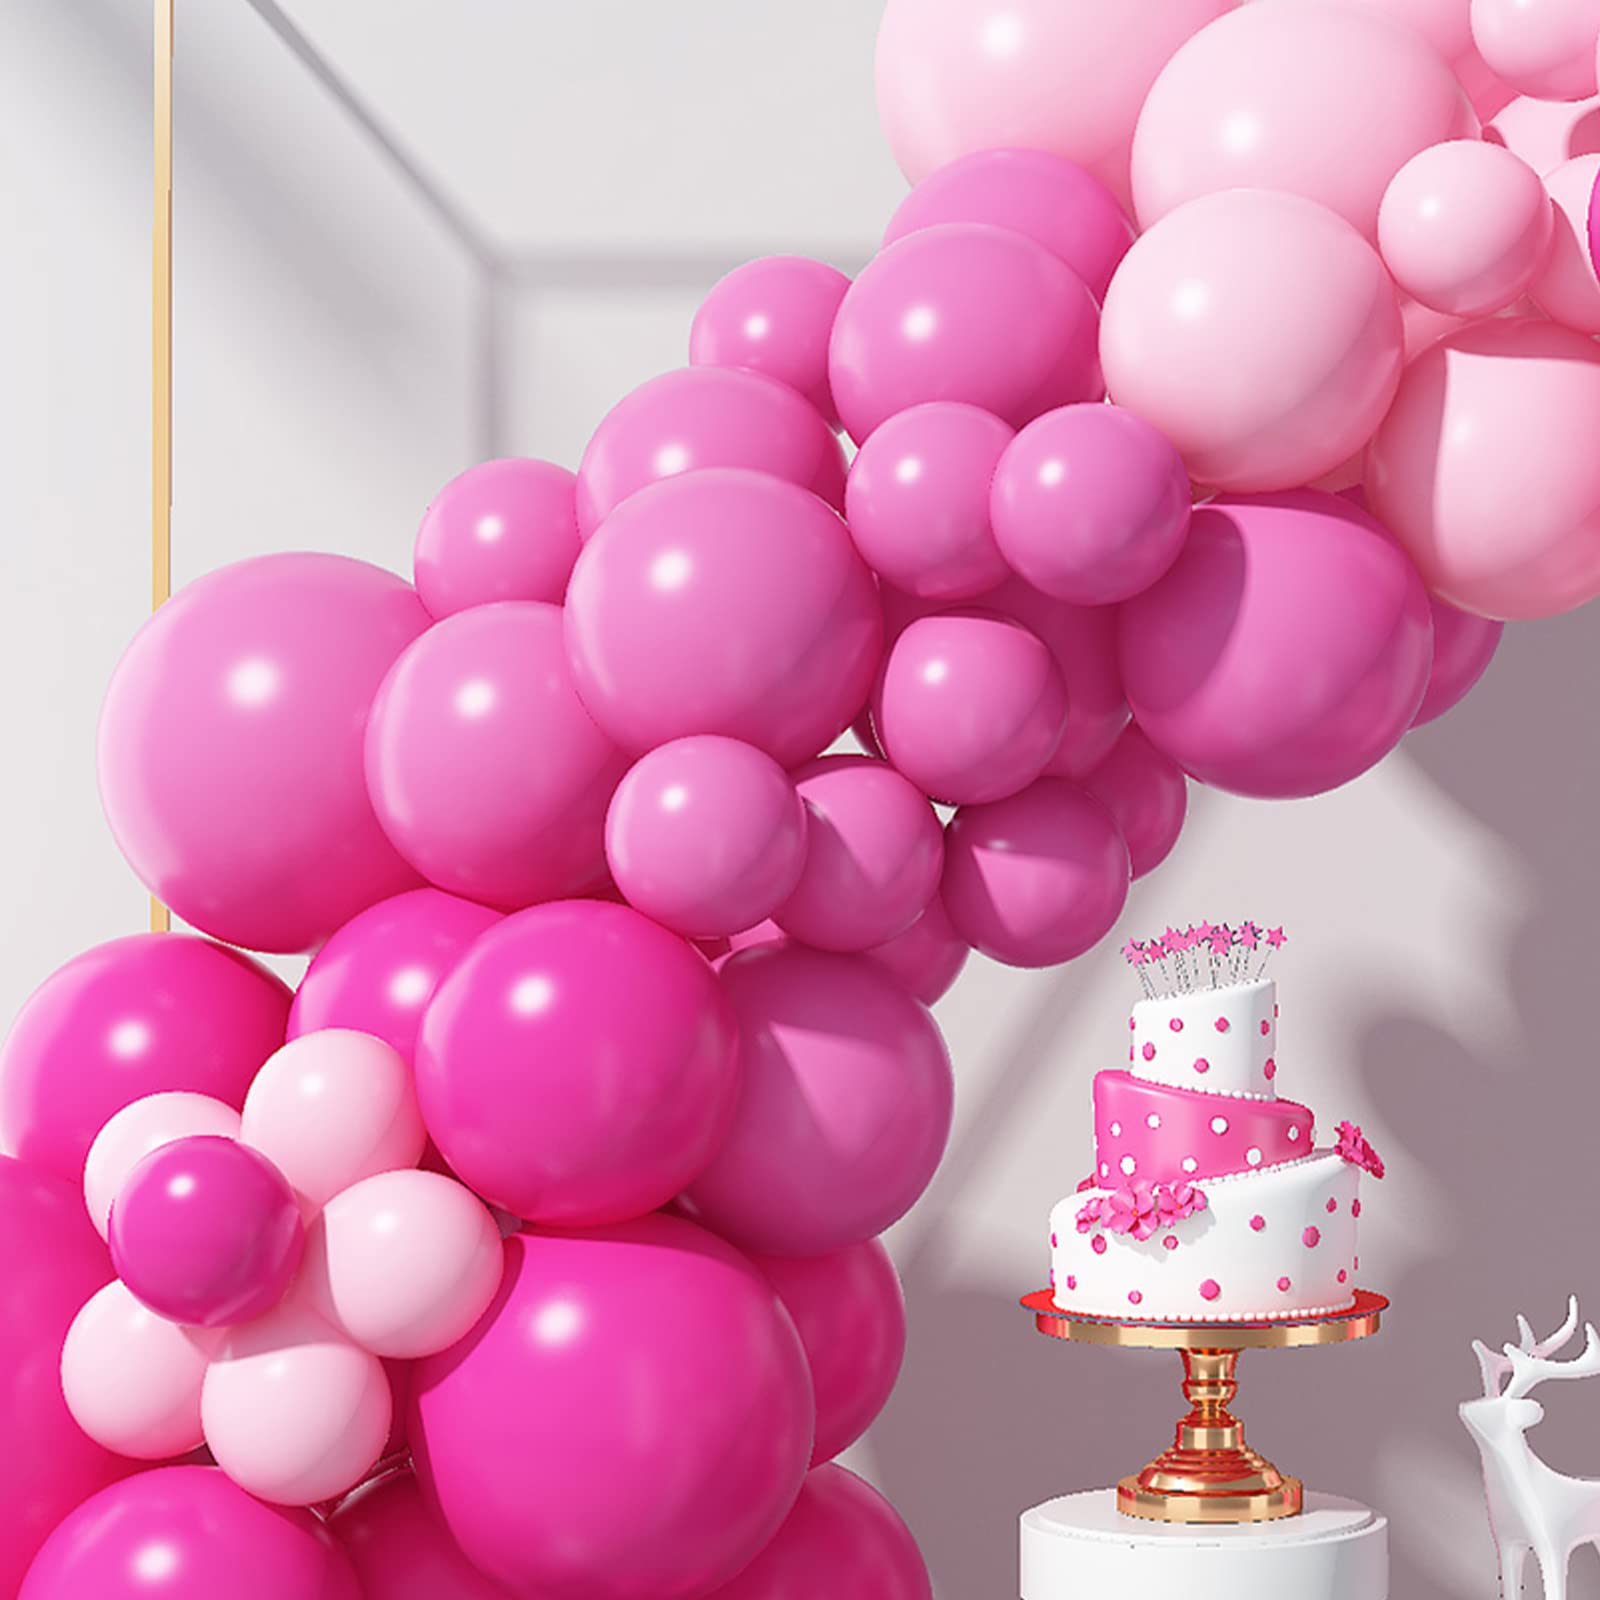 GREMAG Pink Balloon Garland Kit, Hot Pink Balloons Arch Party Decorations, 97 Pcs Macaron Pink Retro Peach, 18 12 10 5 Inch Latex Balloons with Balloon Flower For Birthday Shower Princess Theme Decor